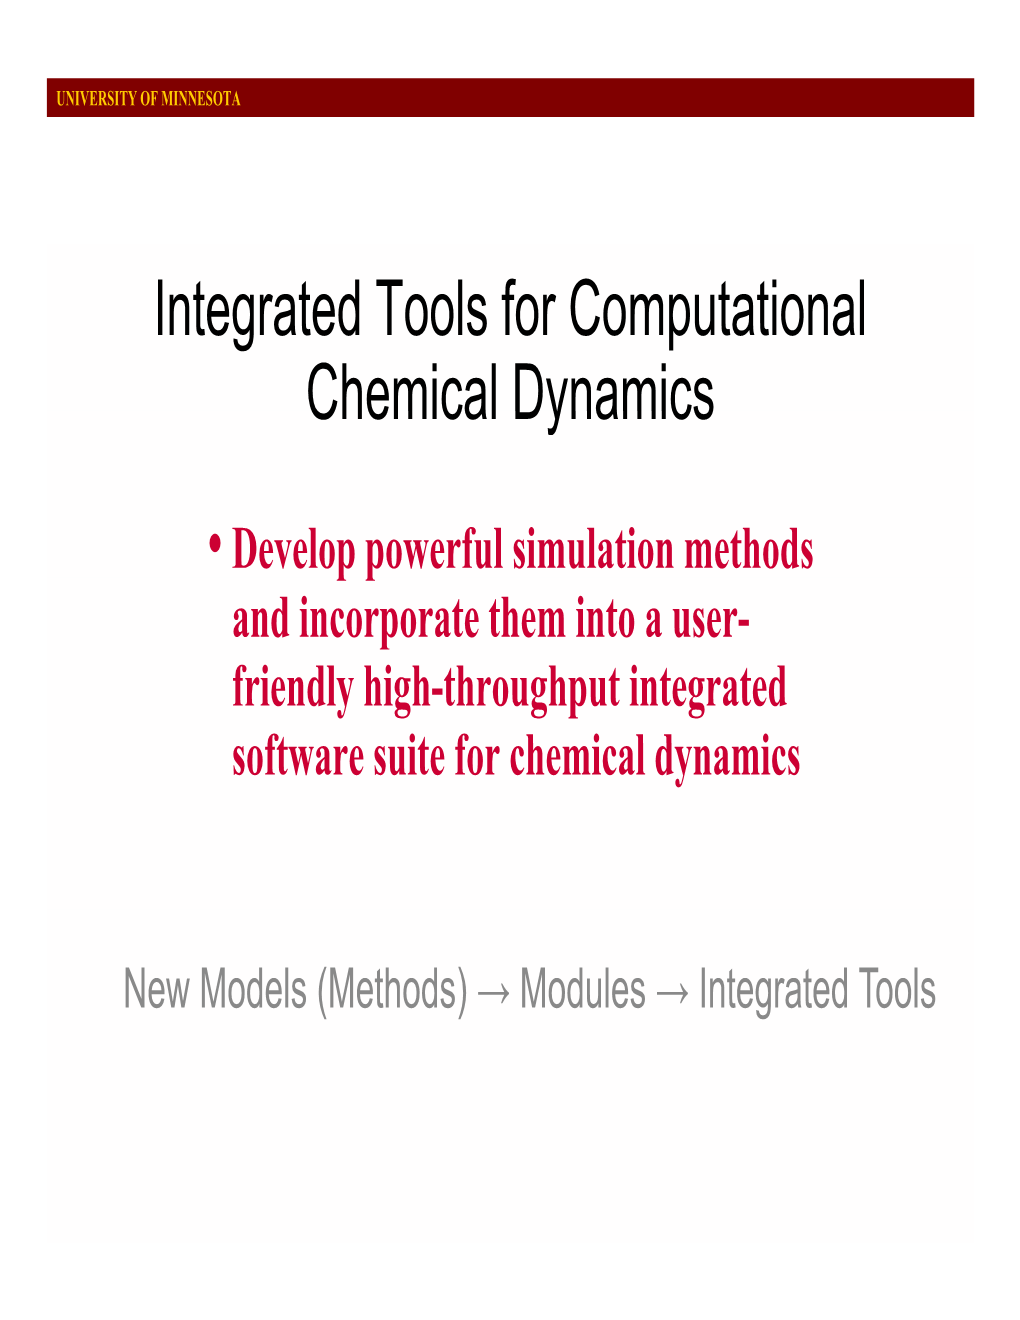 Integrated Tools for Computational Chemical Dynamics